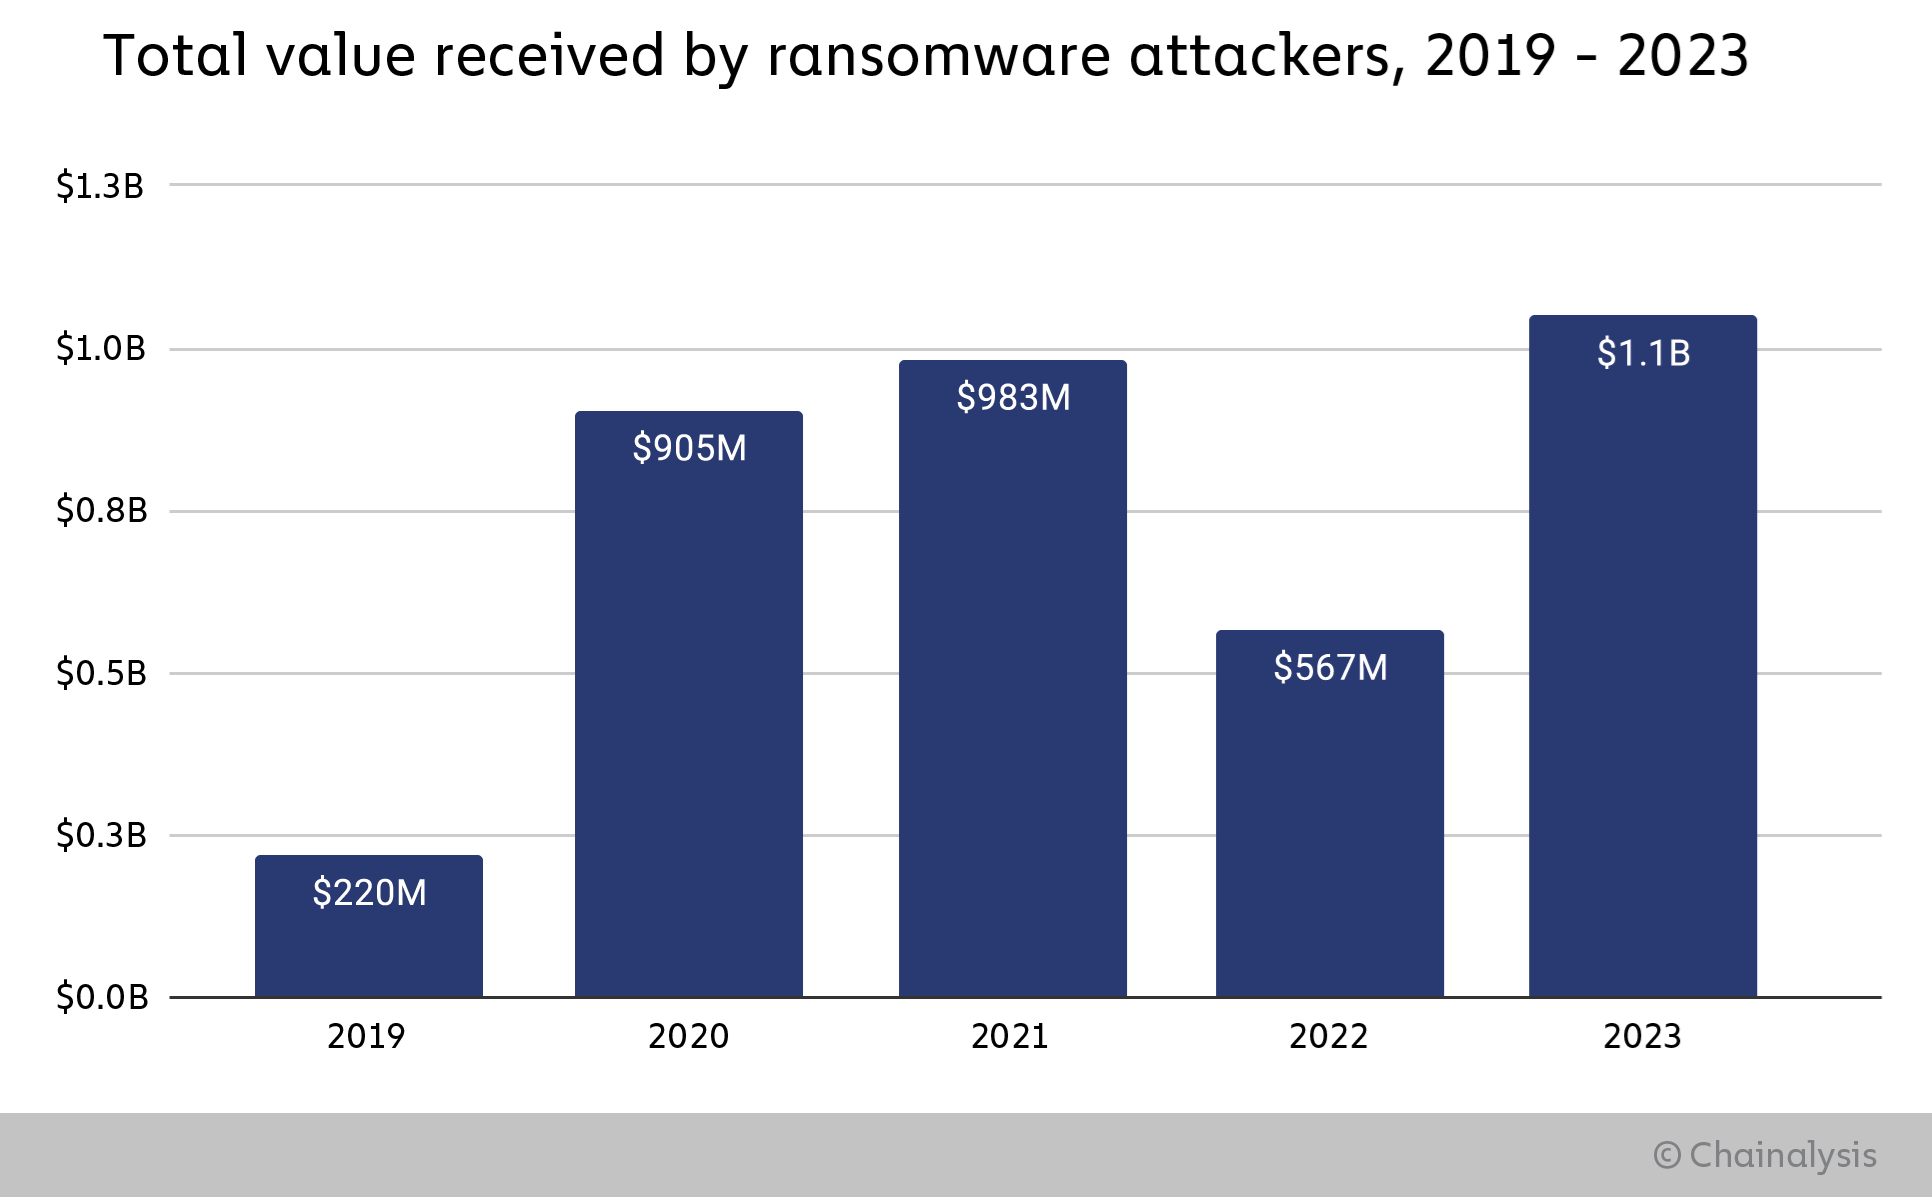 Ransomware earnings hit $1.1 billion in 2023, a record high, up from $567 million in 2022, Chainalysis reports.